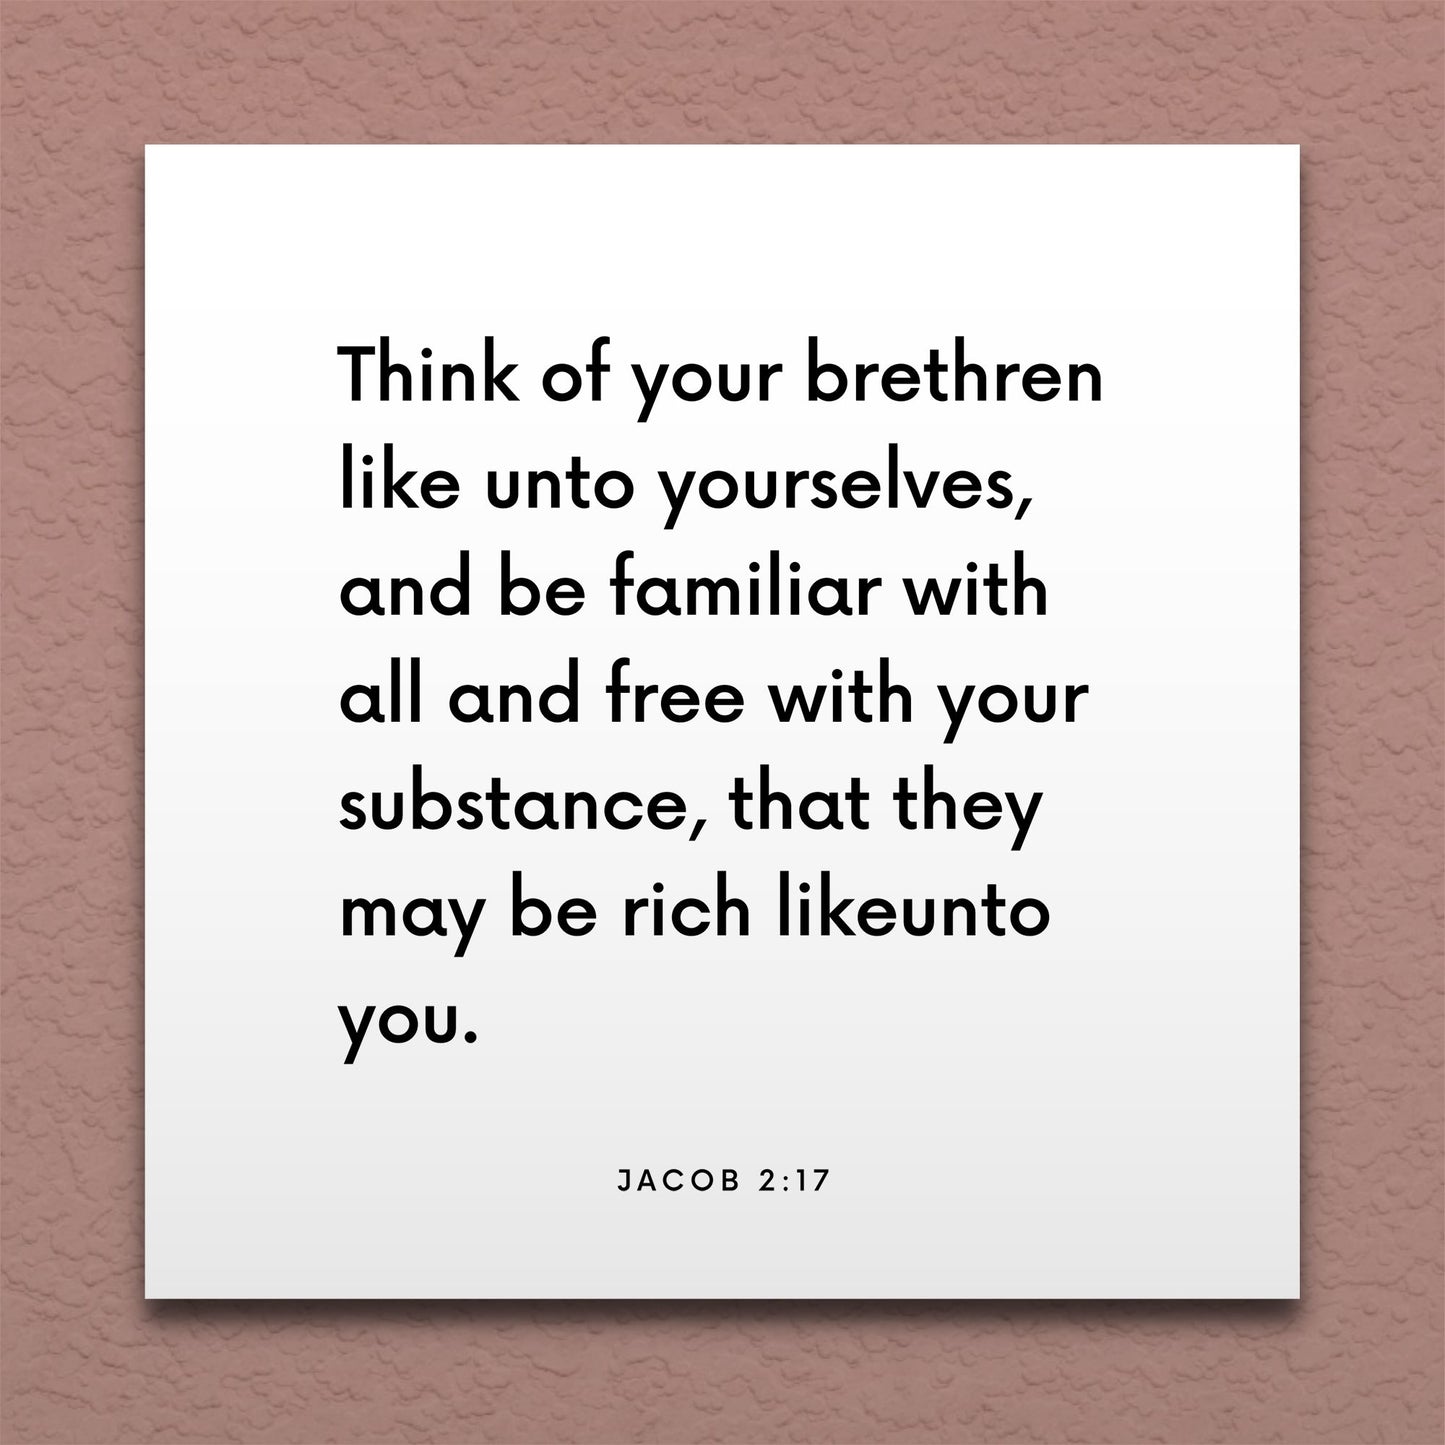 Wall-mounted scripture tile for Jacob 2:17 - "Think of your brethren like unto yourselves"